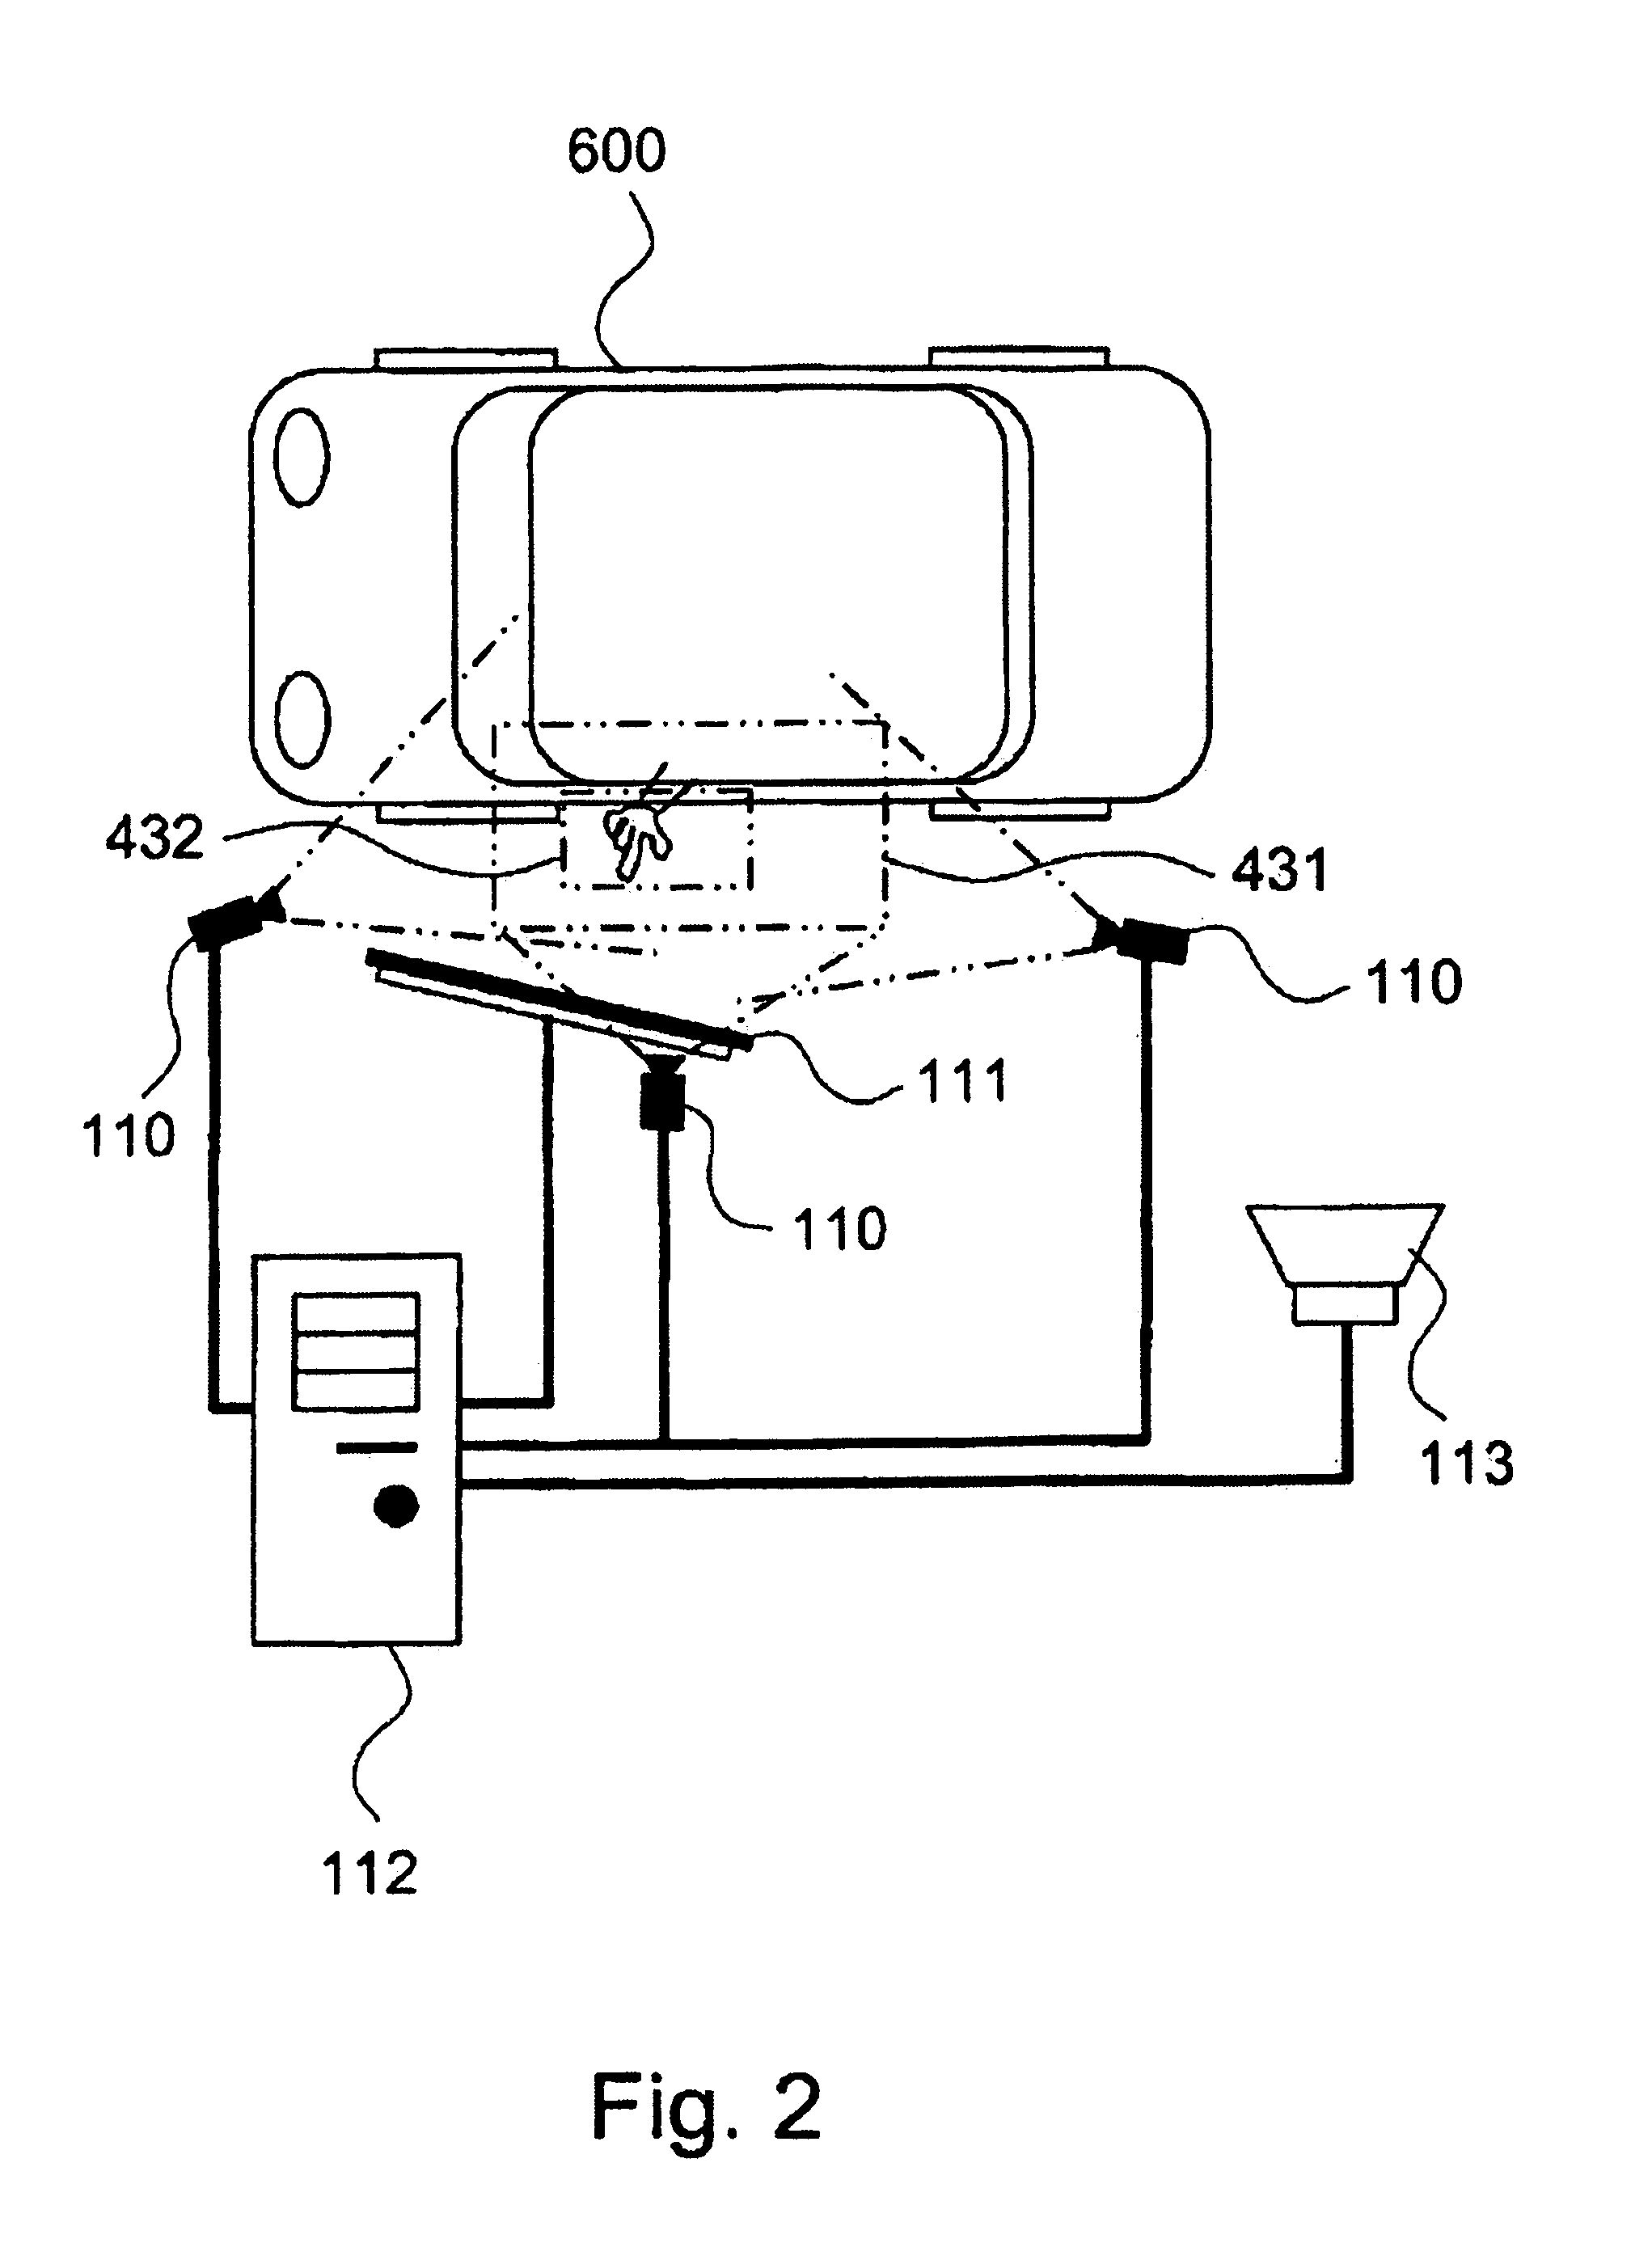 Method and apparatus for providing virtual touch interaction in the drive-thru